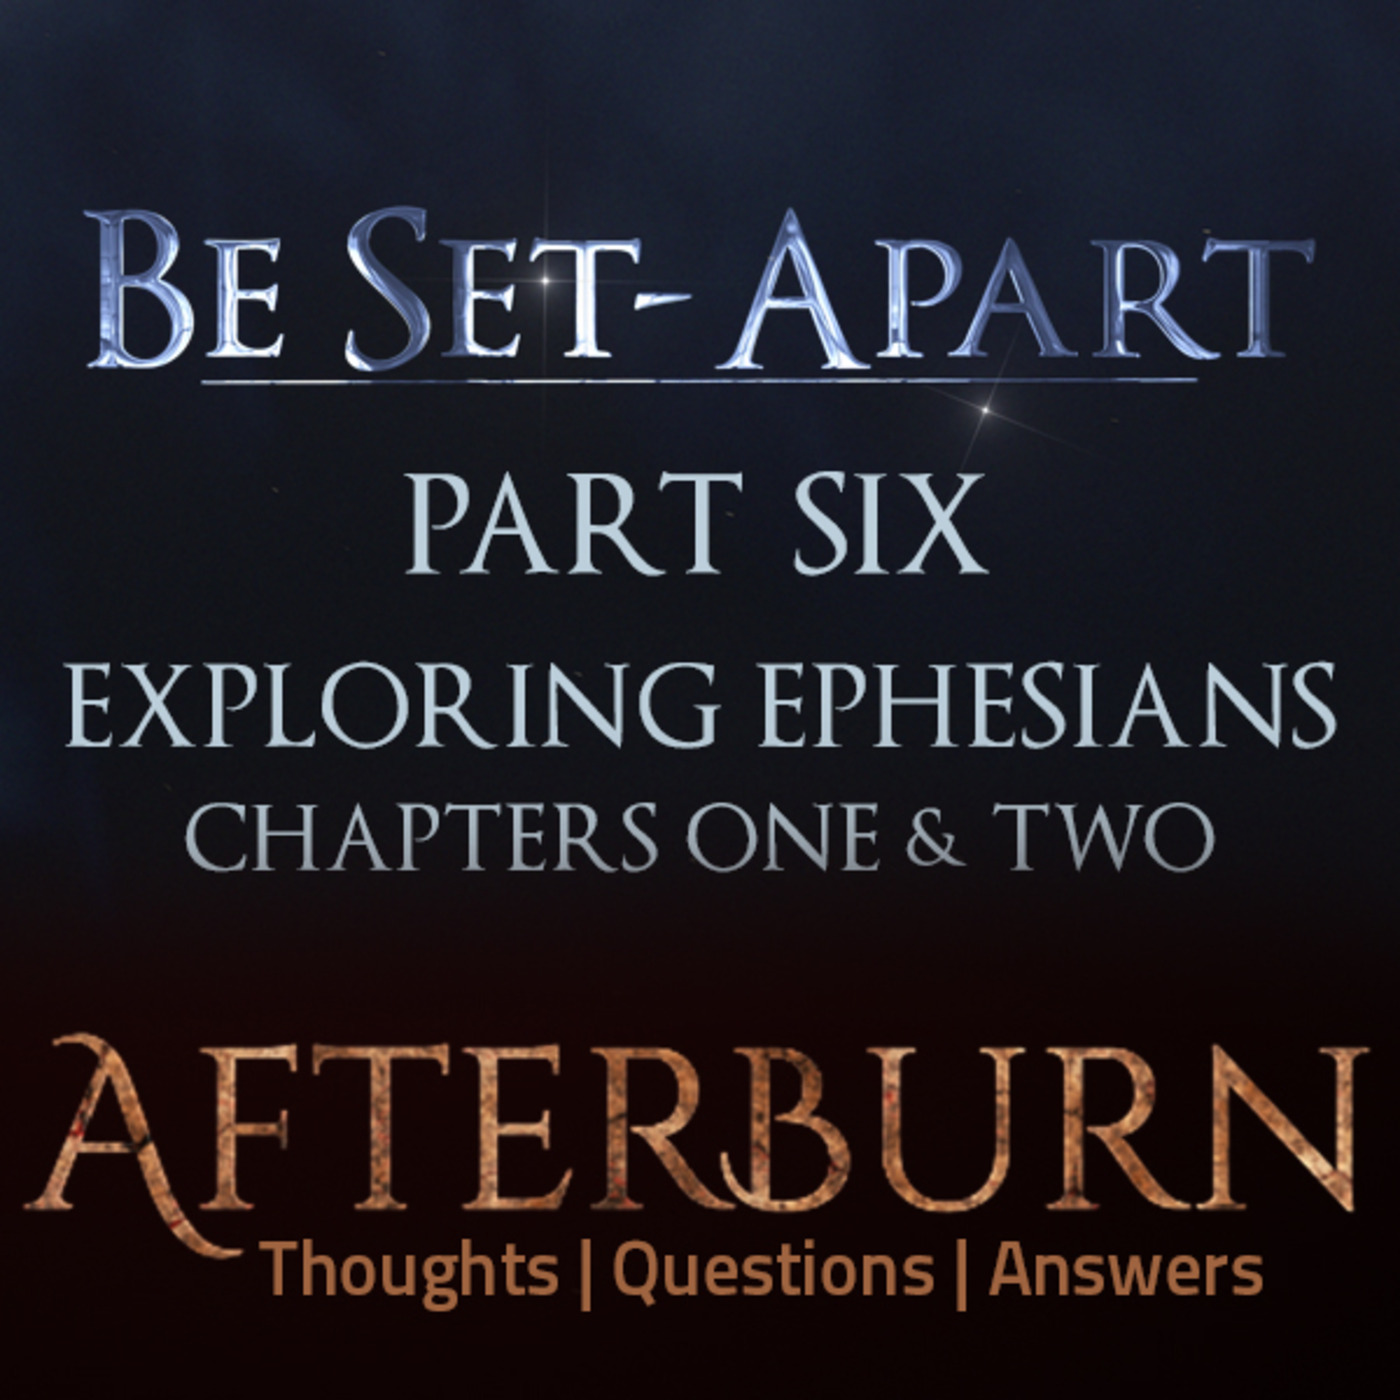 Episode 766: Afterburn | Thoughts, Q&A on Be Set-Apart | Part Six | Exploring Ephesians Chapters One & Two